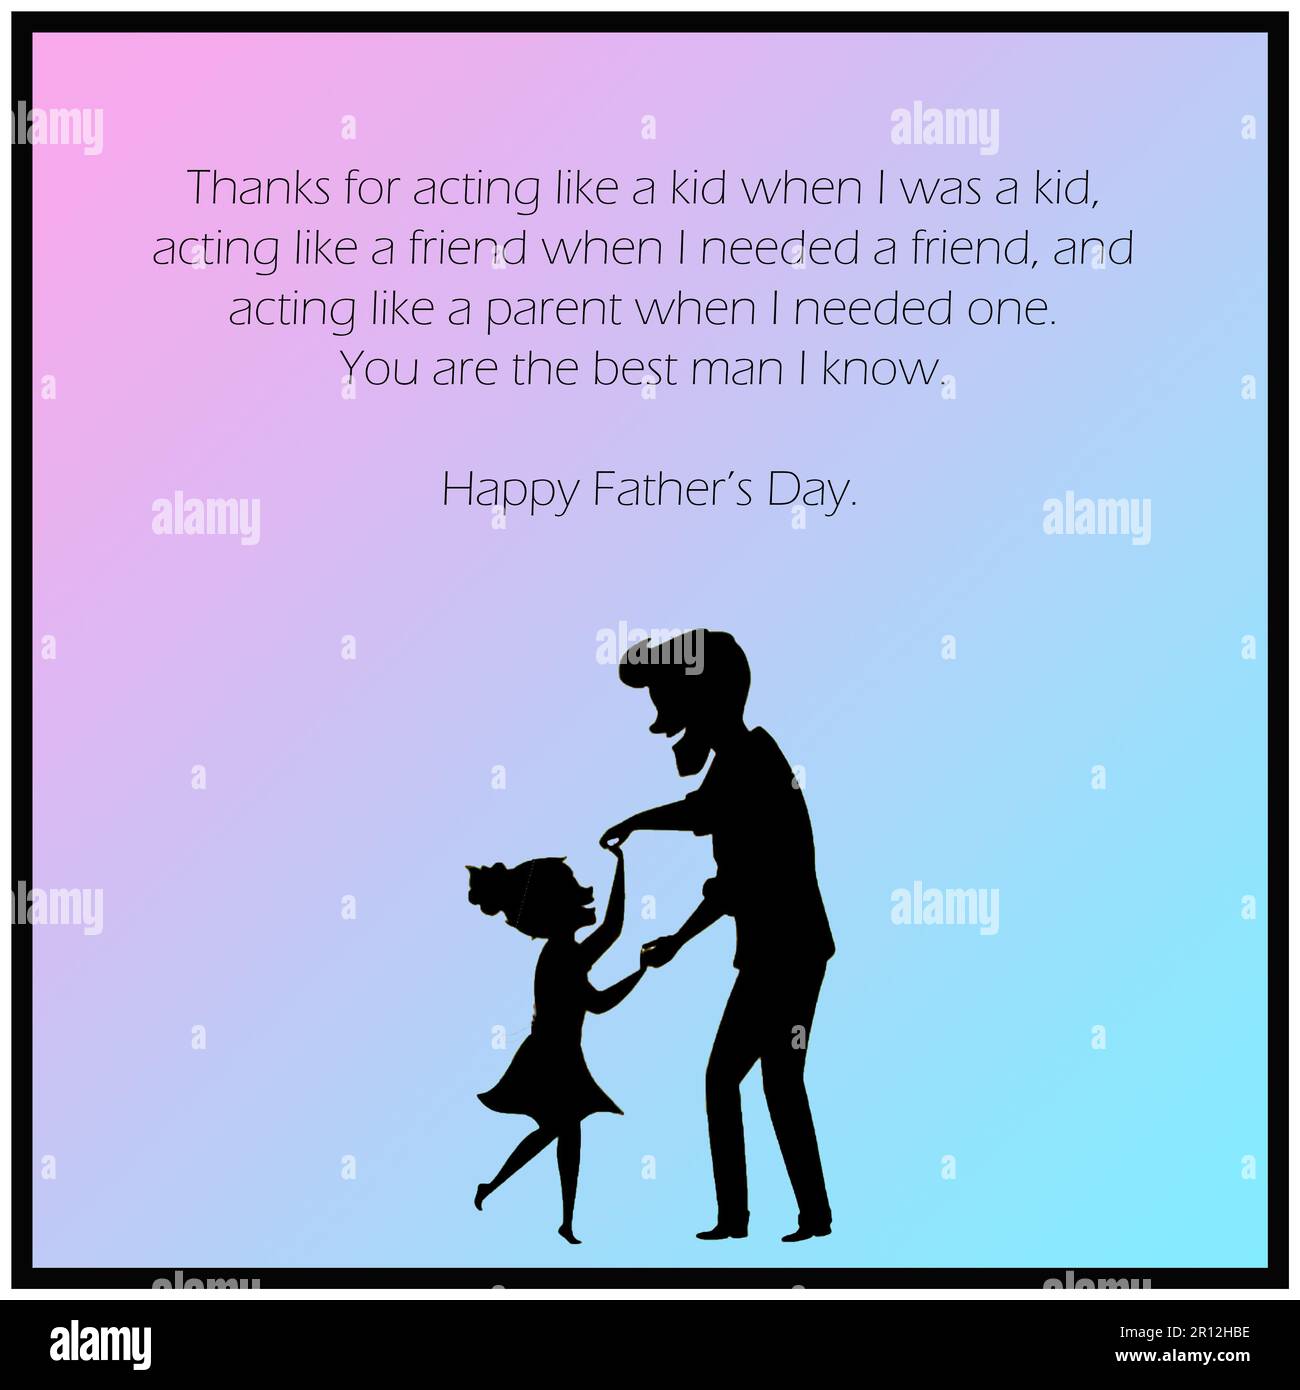 Father's Day Wishes varieties of messages 2023 Stock Photo - Alamy